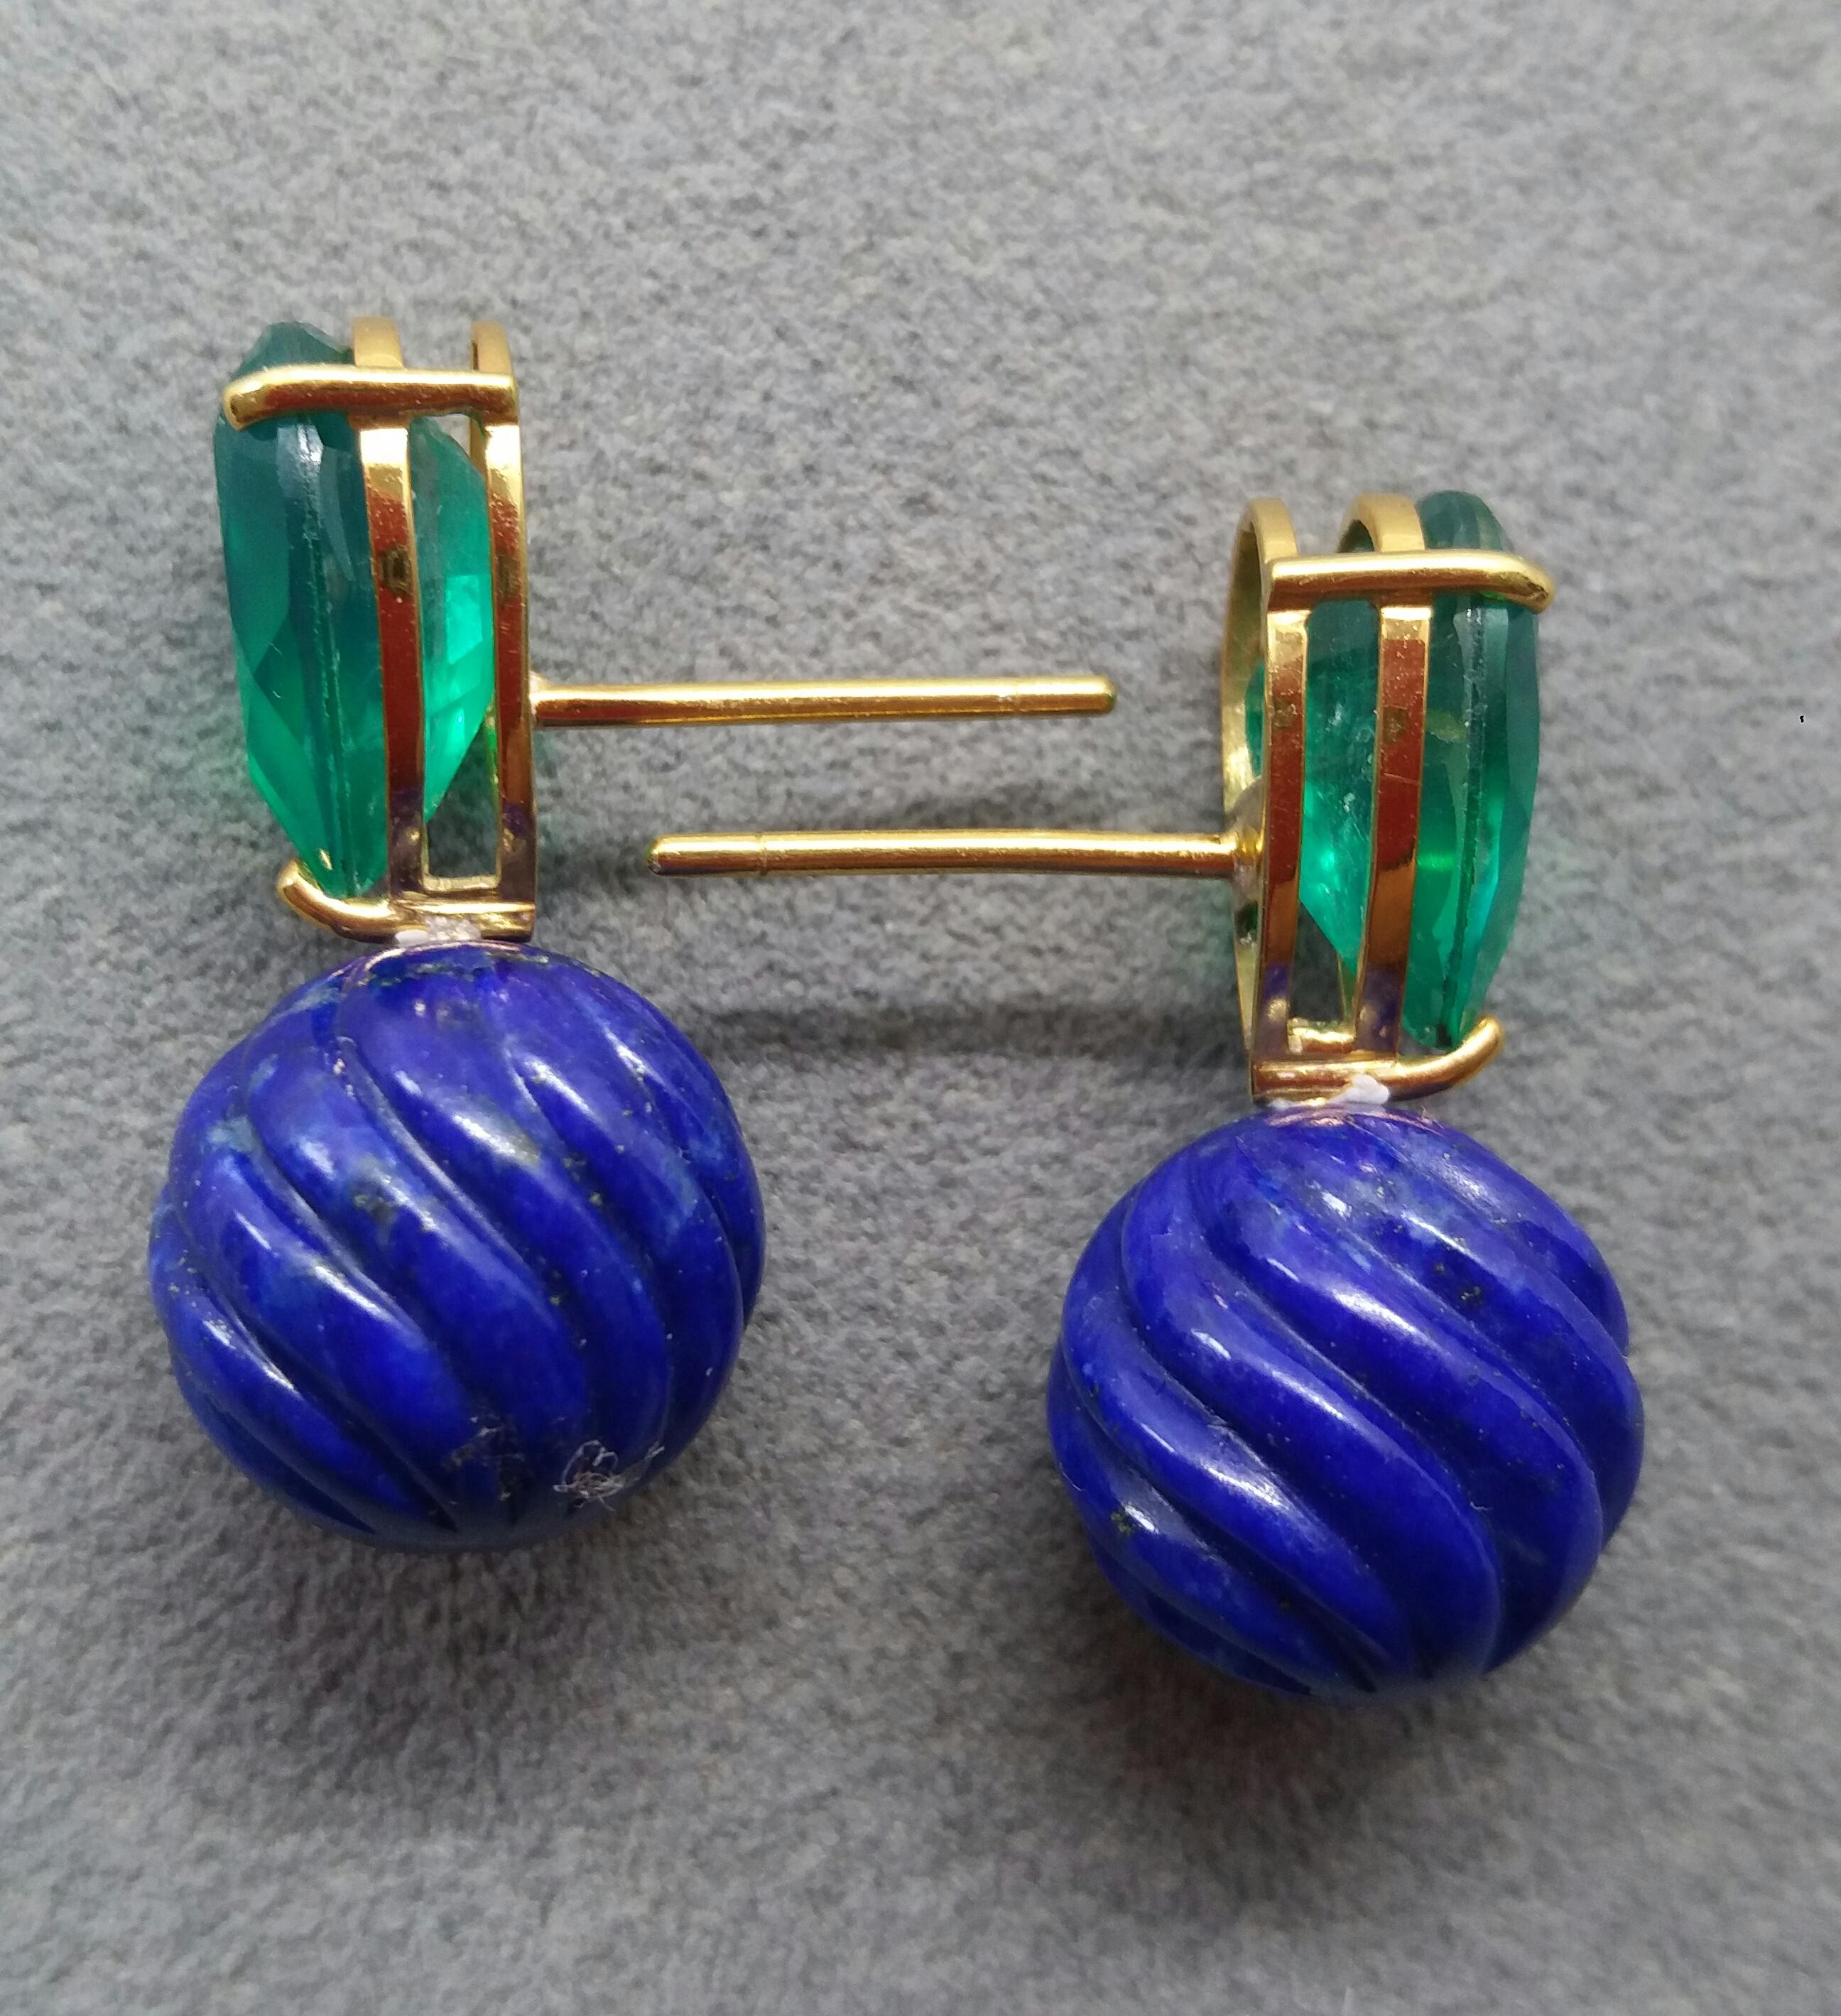 Carved Lapis Lazuli Round Beads Green Quartz 14 Karat Yellow Gold Earrings In Excellent Condition For Sale In Bangkok, TH